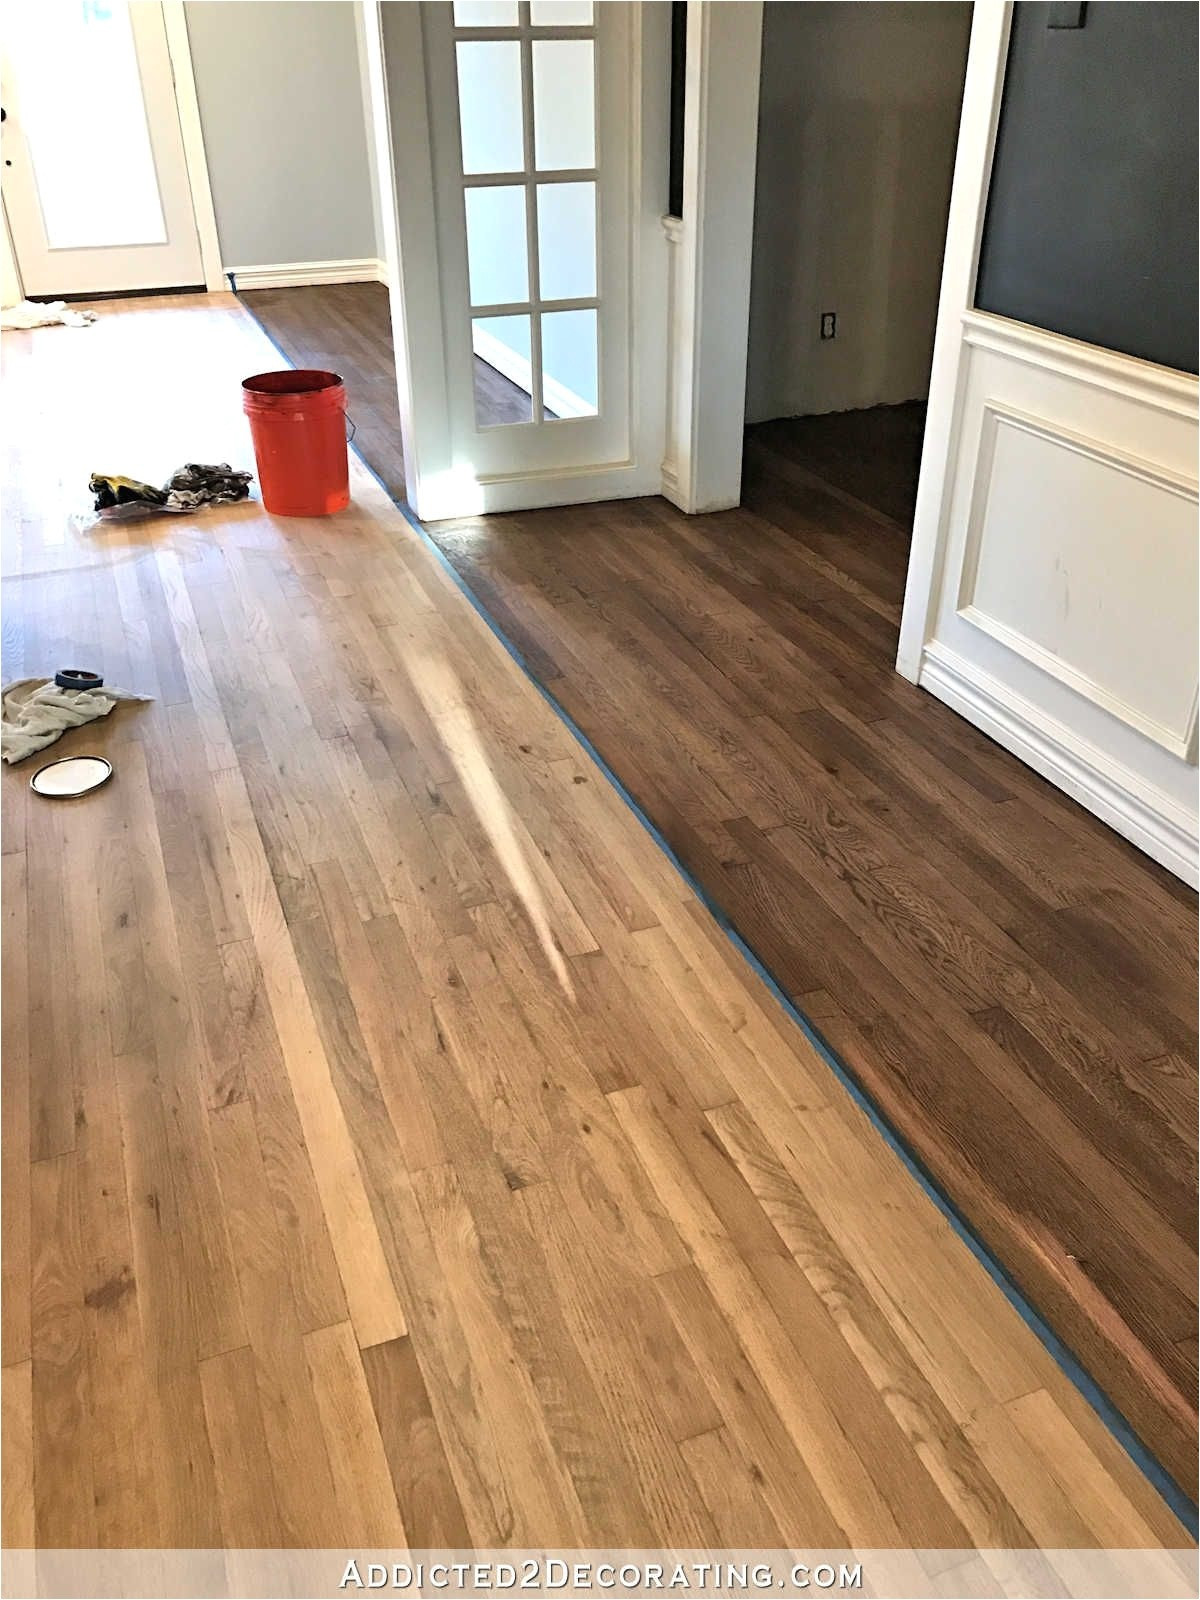 23 Amazing Mirage Red Oak Hardwood Flooring 2024 free download mirage red oak hardwood flooring of 27 elegant laminate flooring made in usa image flooring design ideas intended for best laminate flooring made in usa 40 can you stain laminate